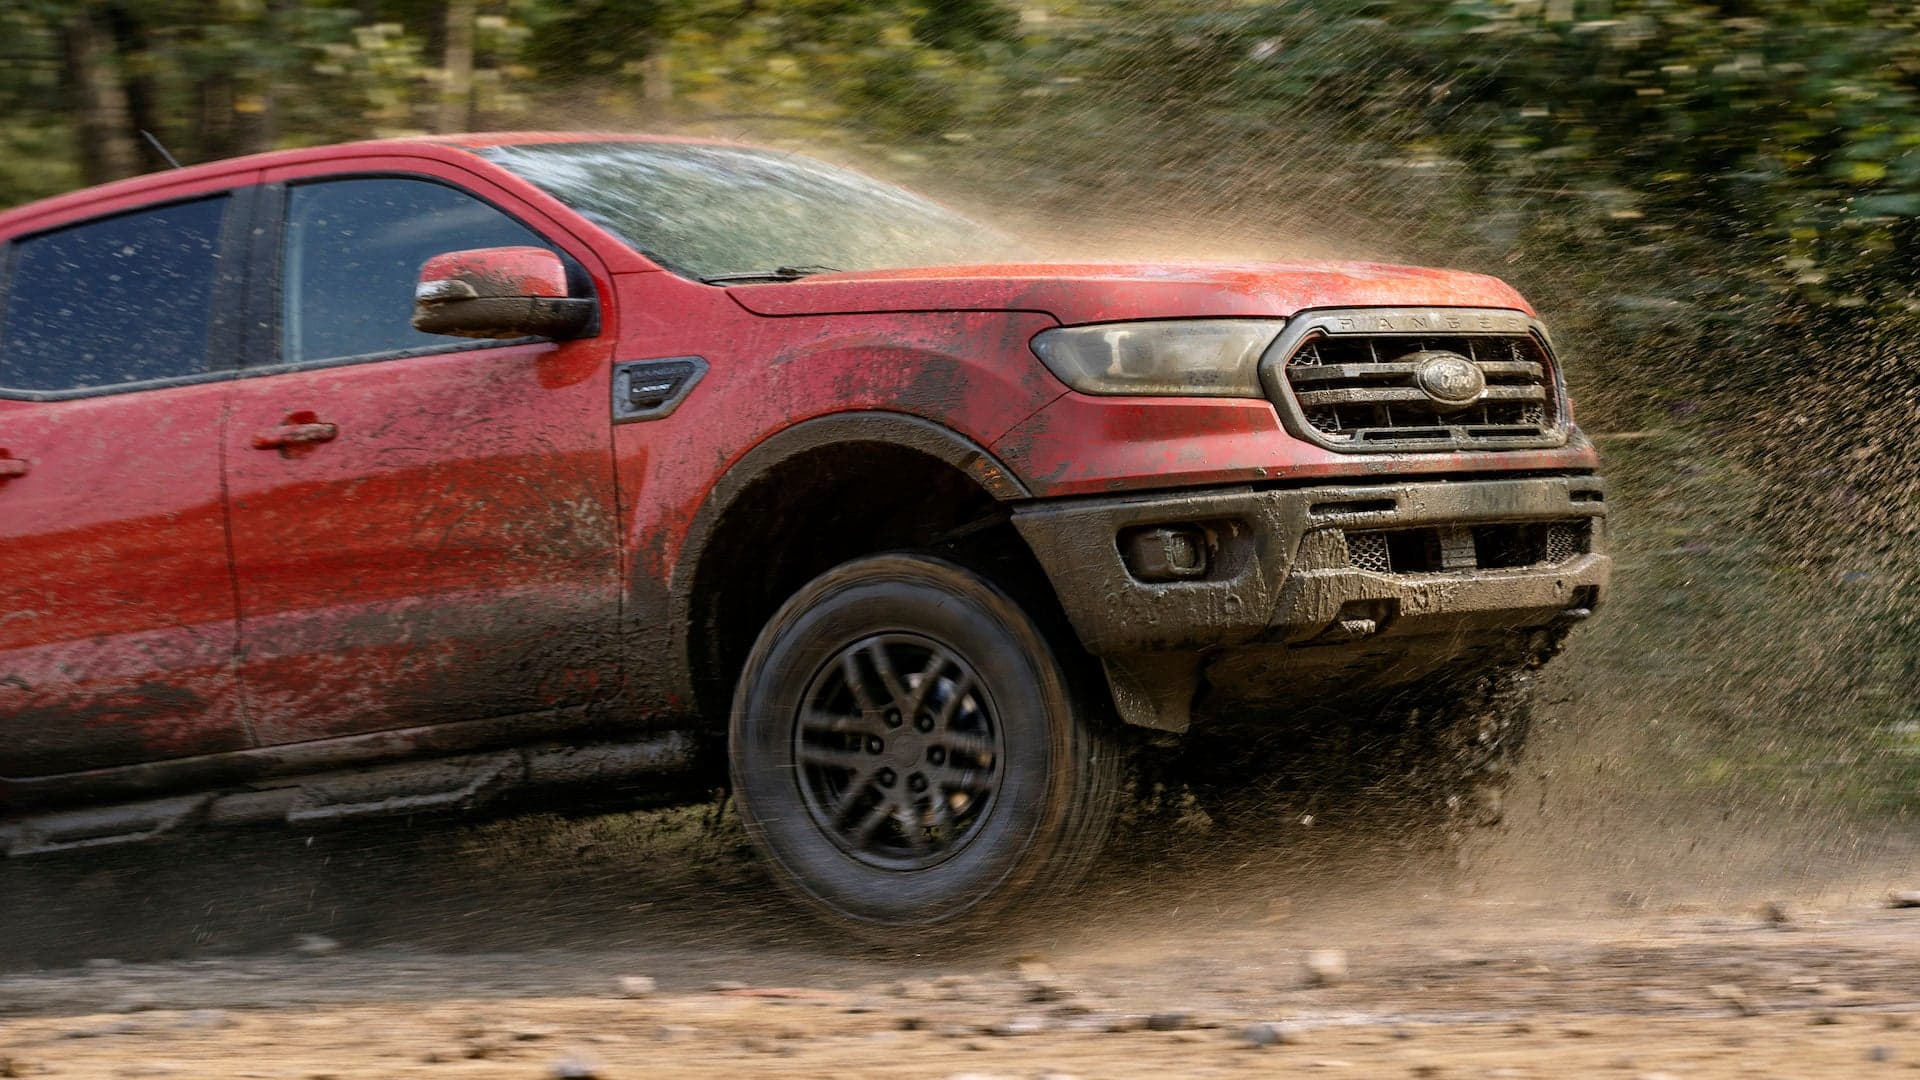 Ford’s Trademark Application for ‘Splash’ Name Could Be Another Win for Truck Fans